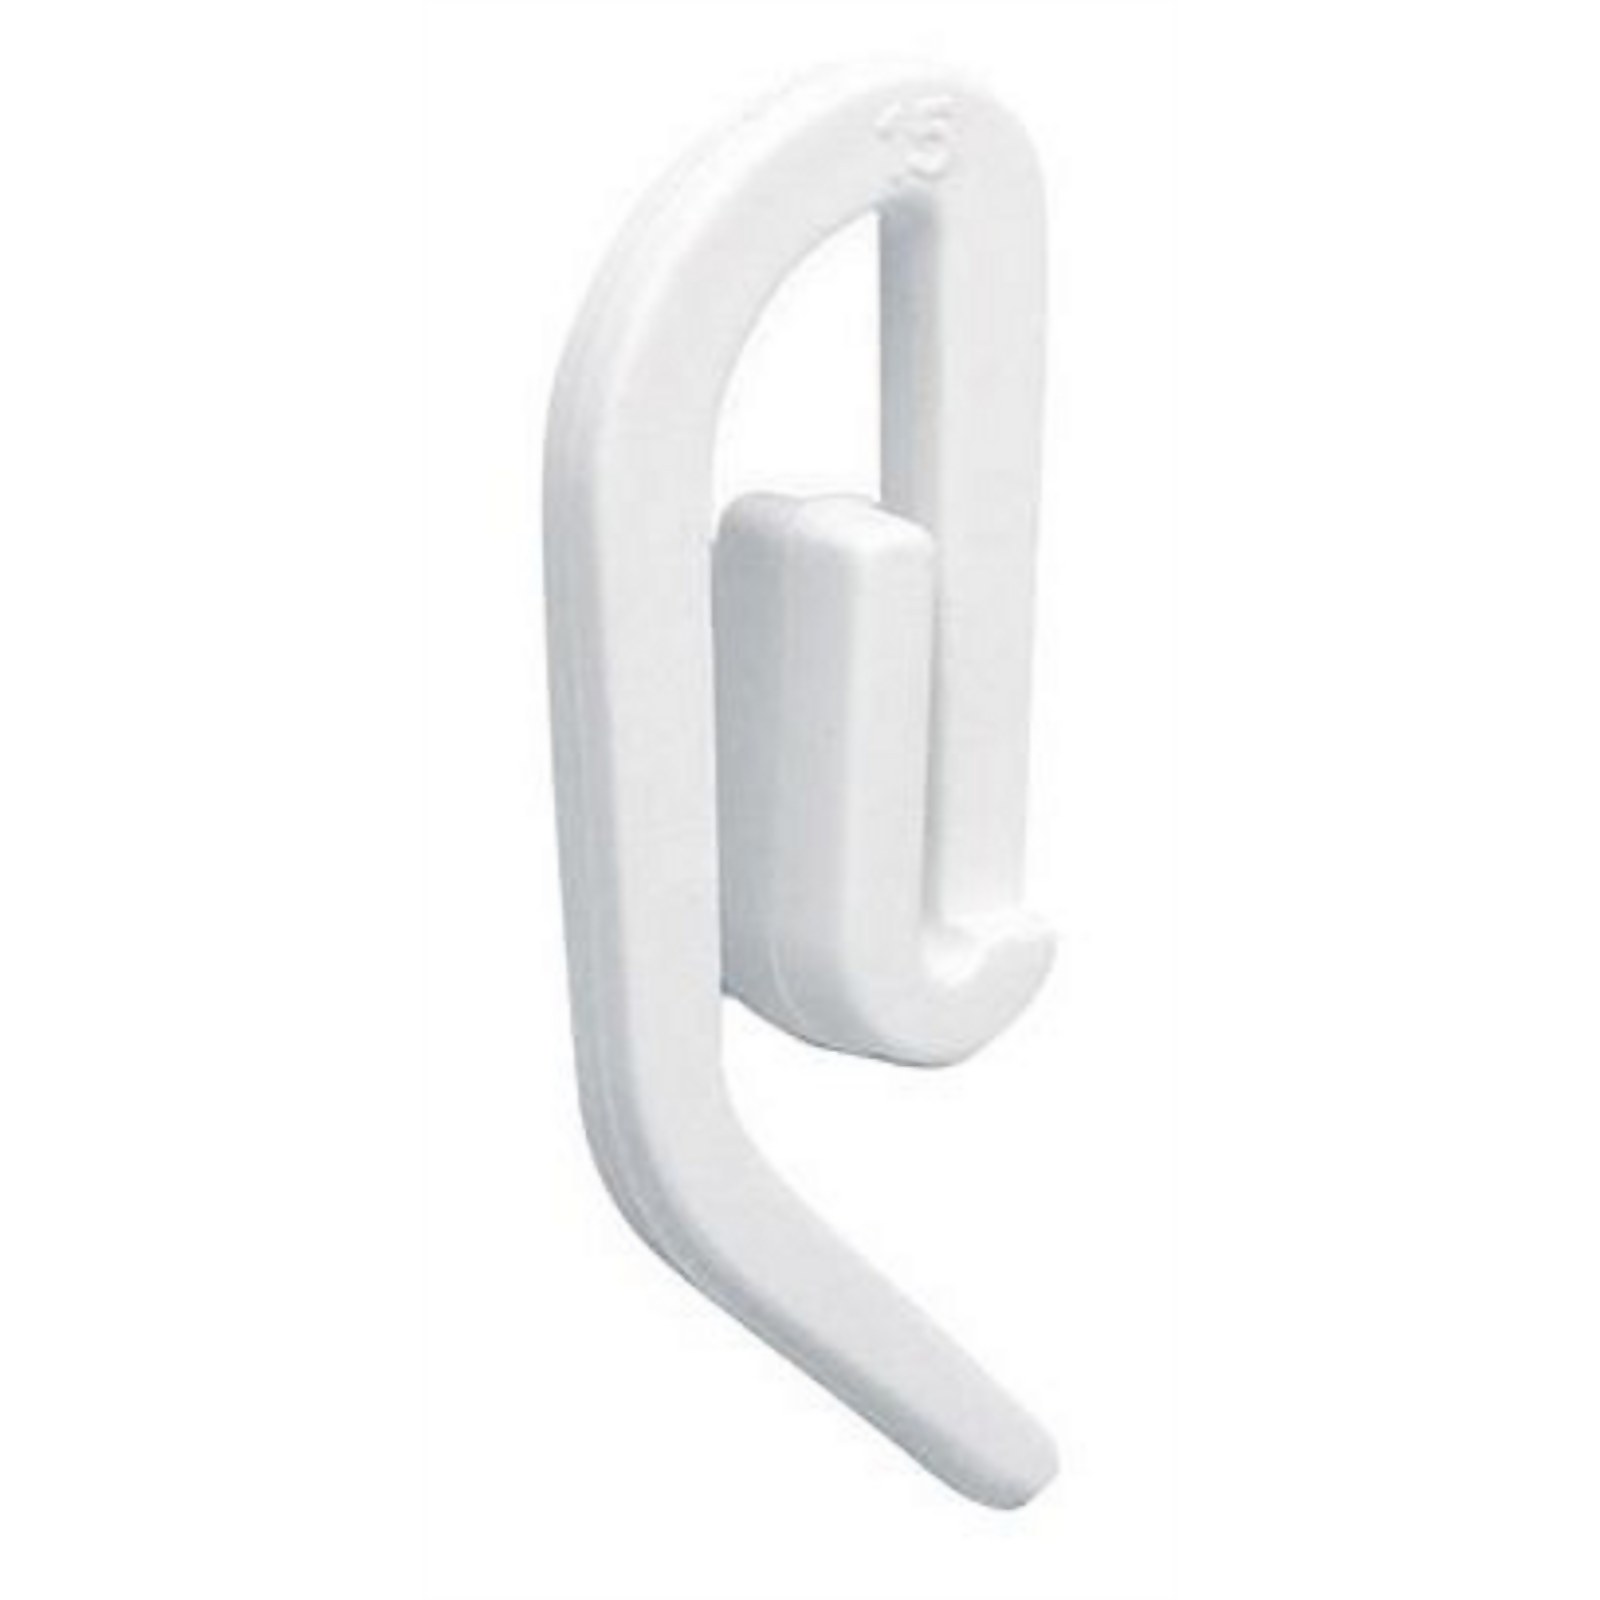 Photo of Curtain Hooks - 20 Pack